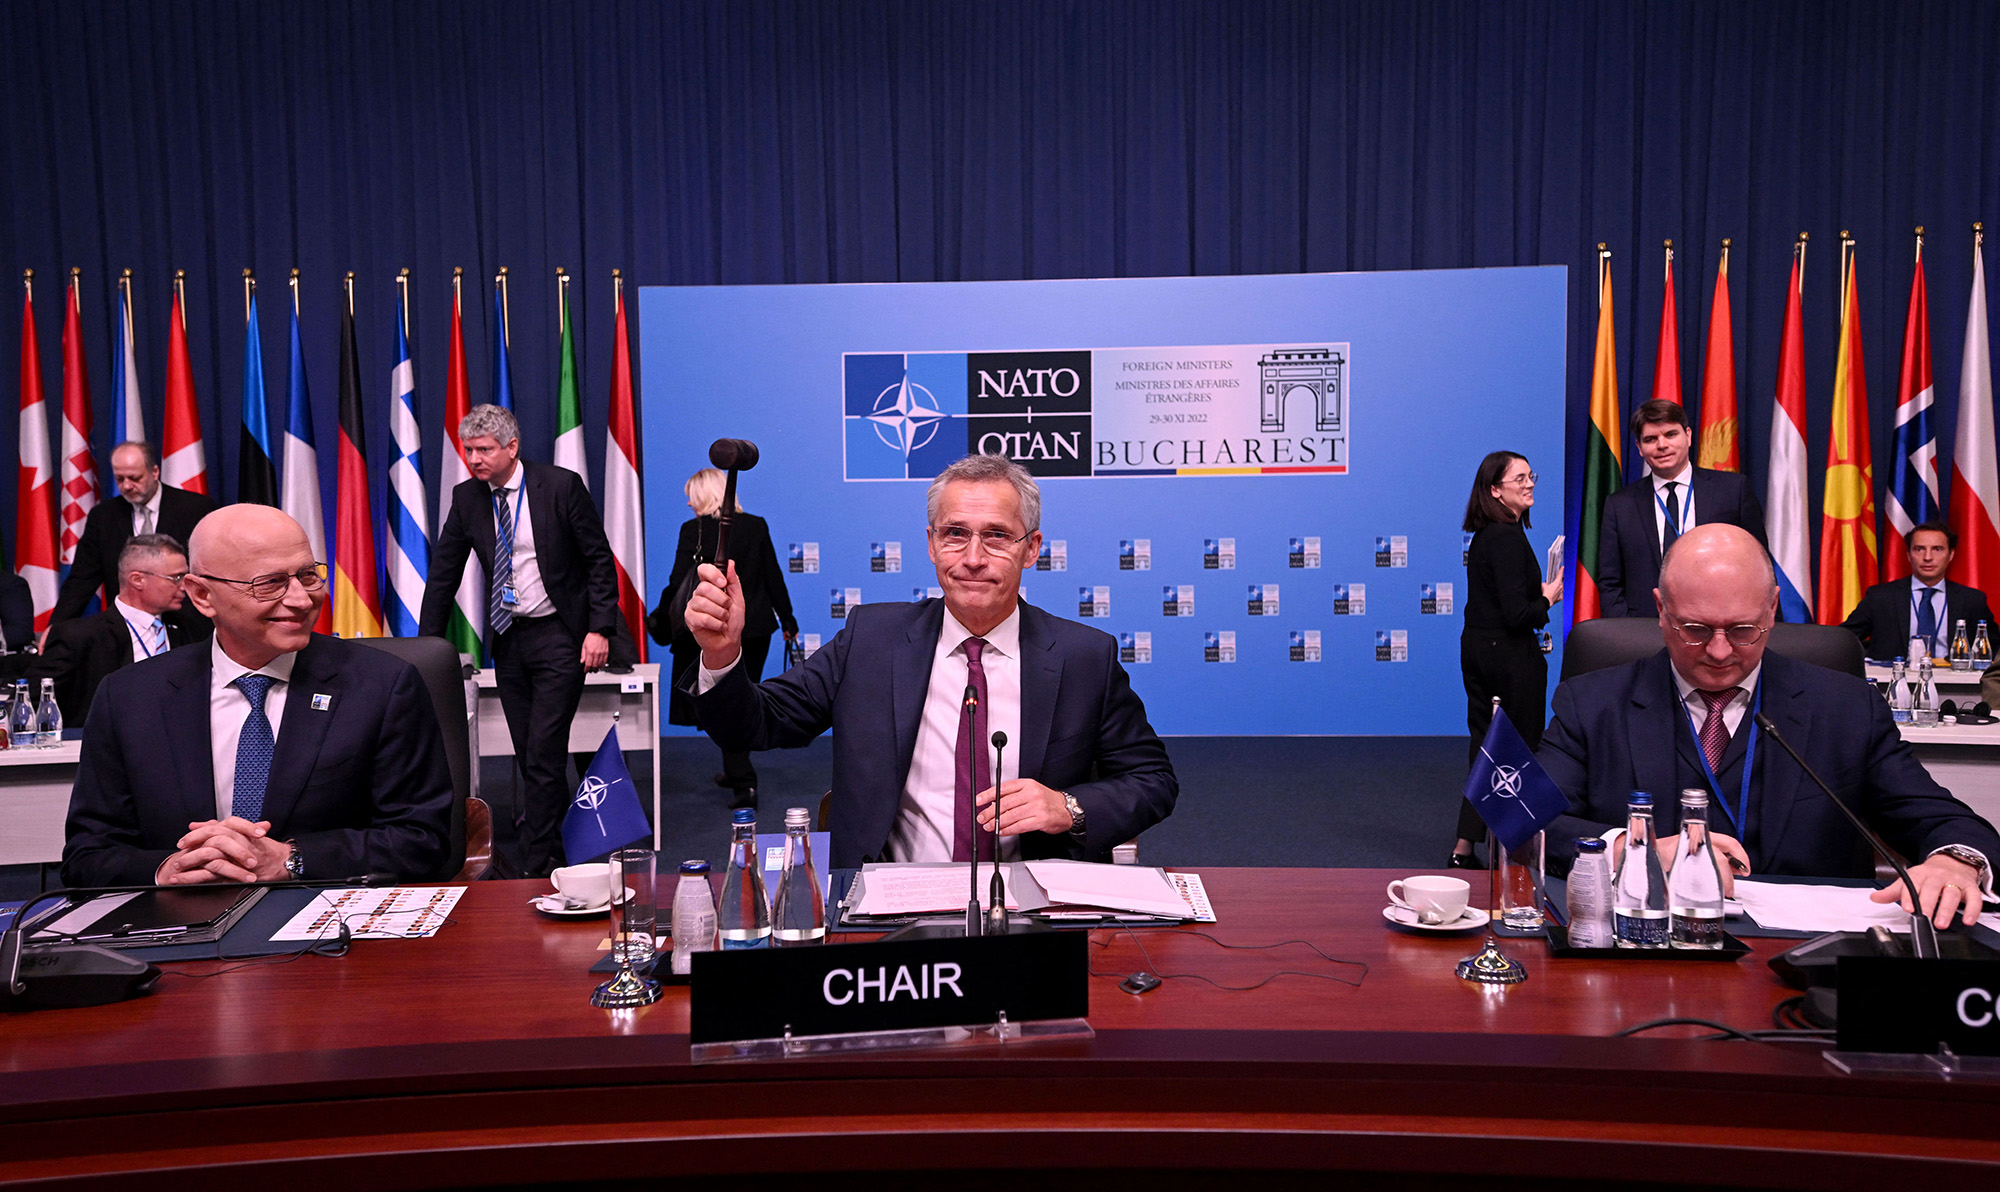 NATO Secretary General Jens Stoltenberg, center, opens the meeting of the NATO Ministers of Foreign Affairs in Bucharest, Romania, on November 30.